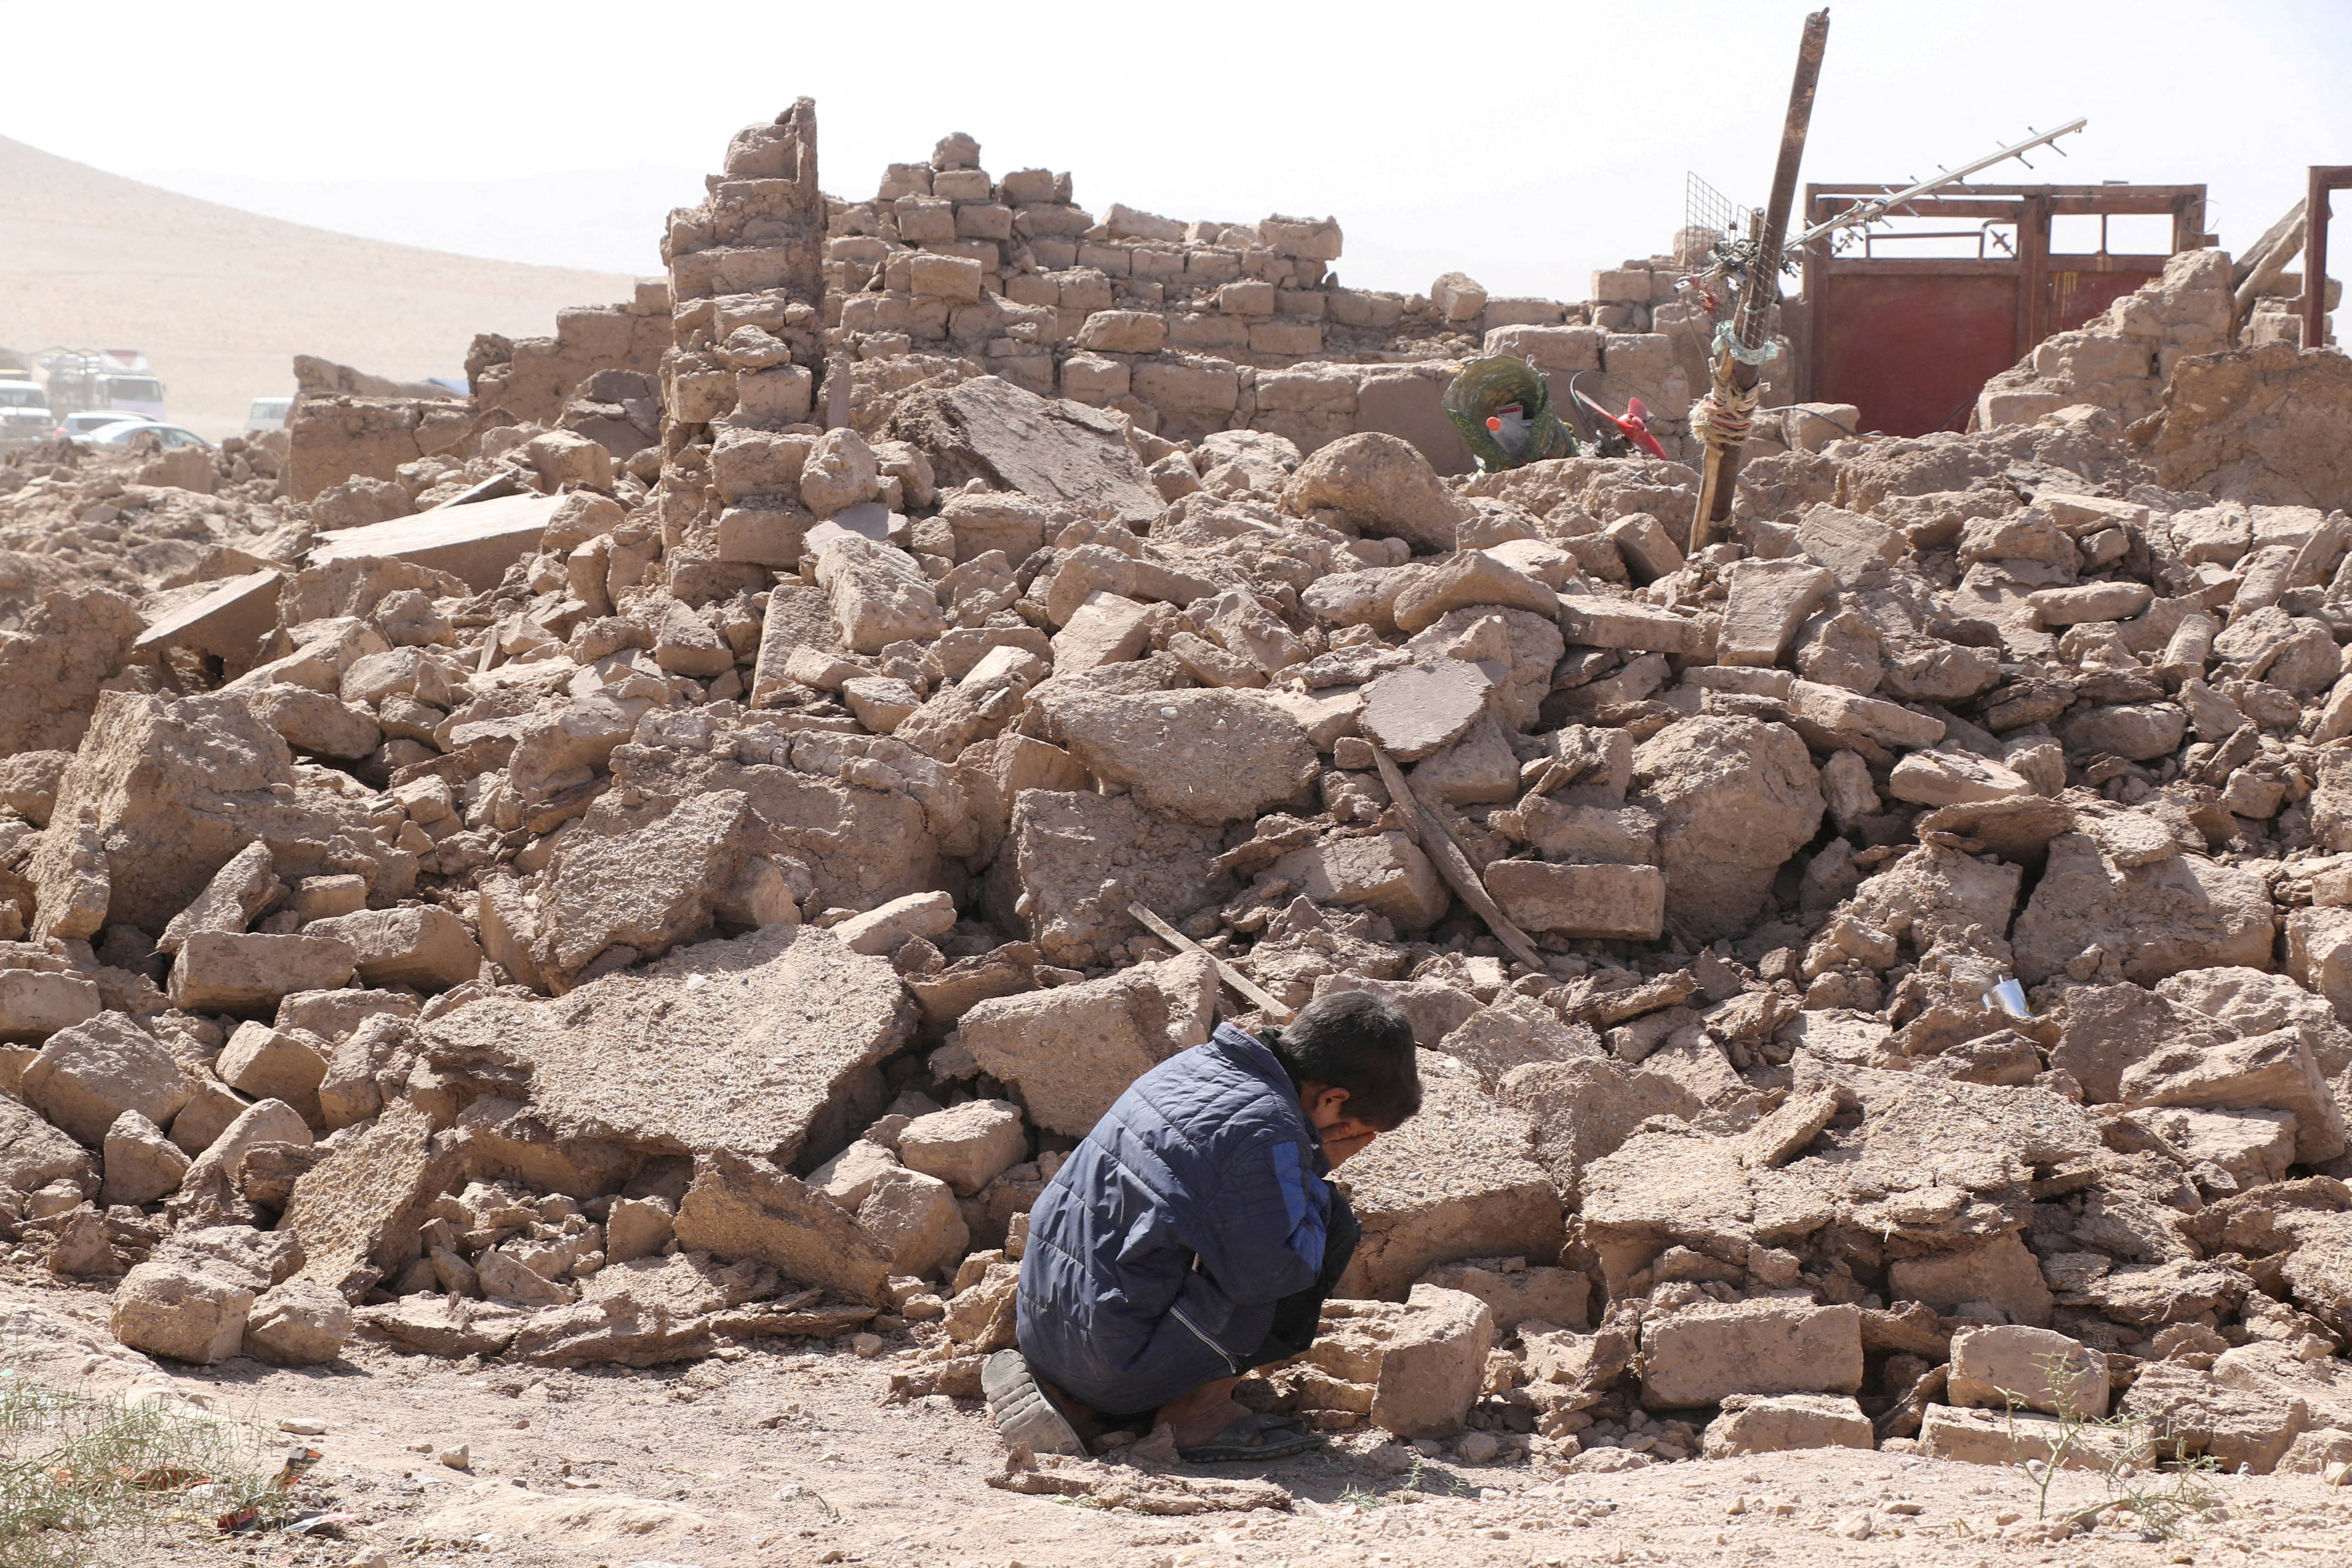 PUIC Secretary General Offers Condolences to the Afghan People Following the Herat earthquake